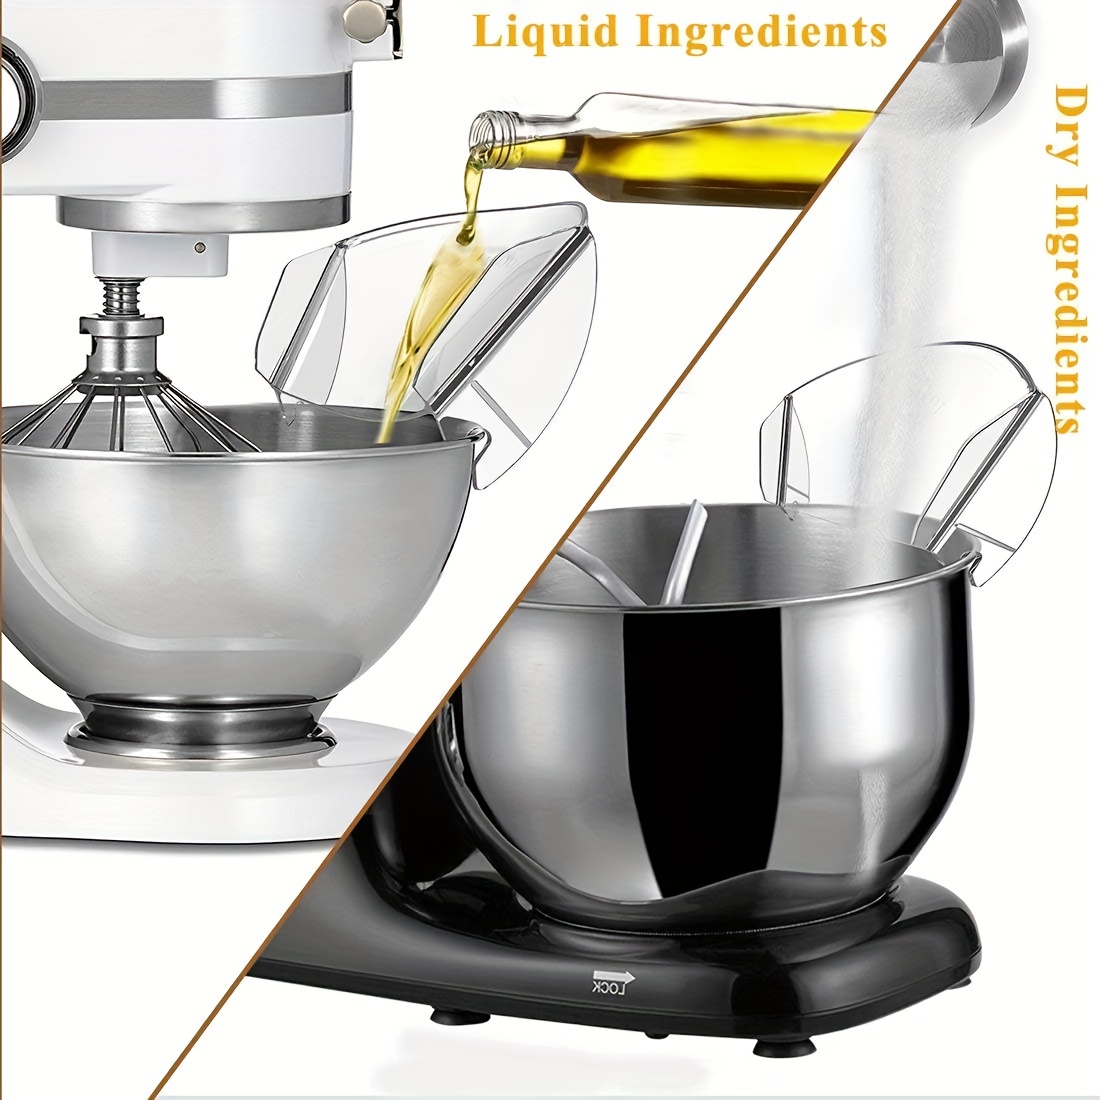 New Metro Design Universal Pouring Chute for Stand Mixer Stainless Steel